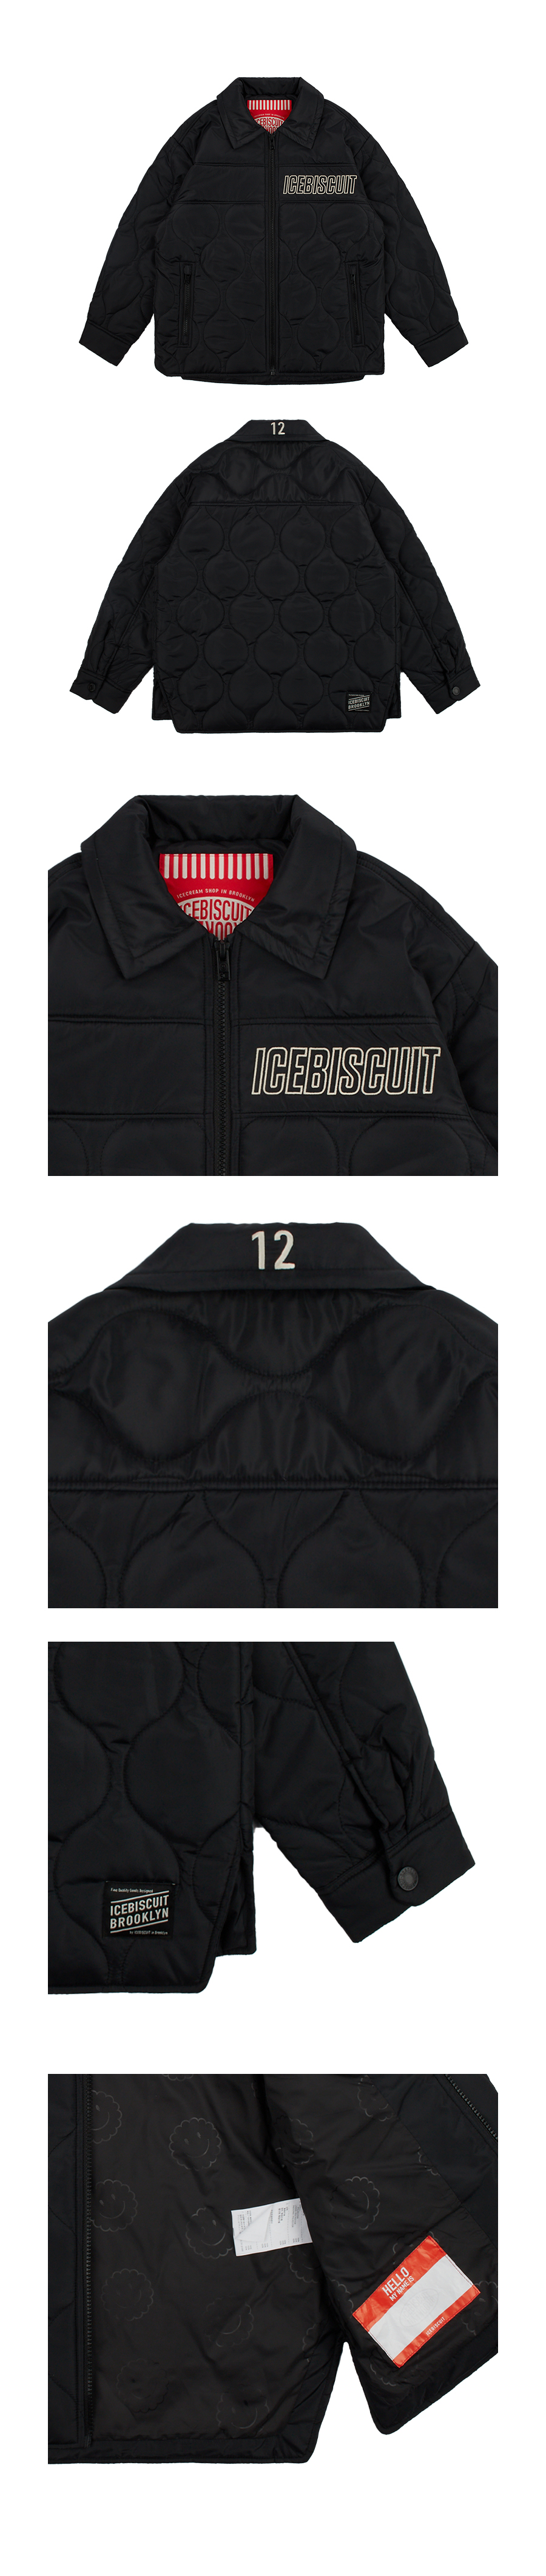 Icebiscuit letter graphic quilted coach jacket 상세 이미지